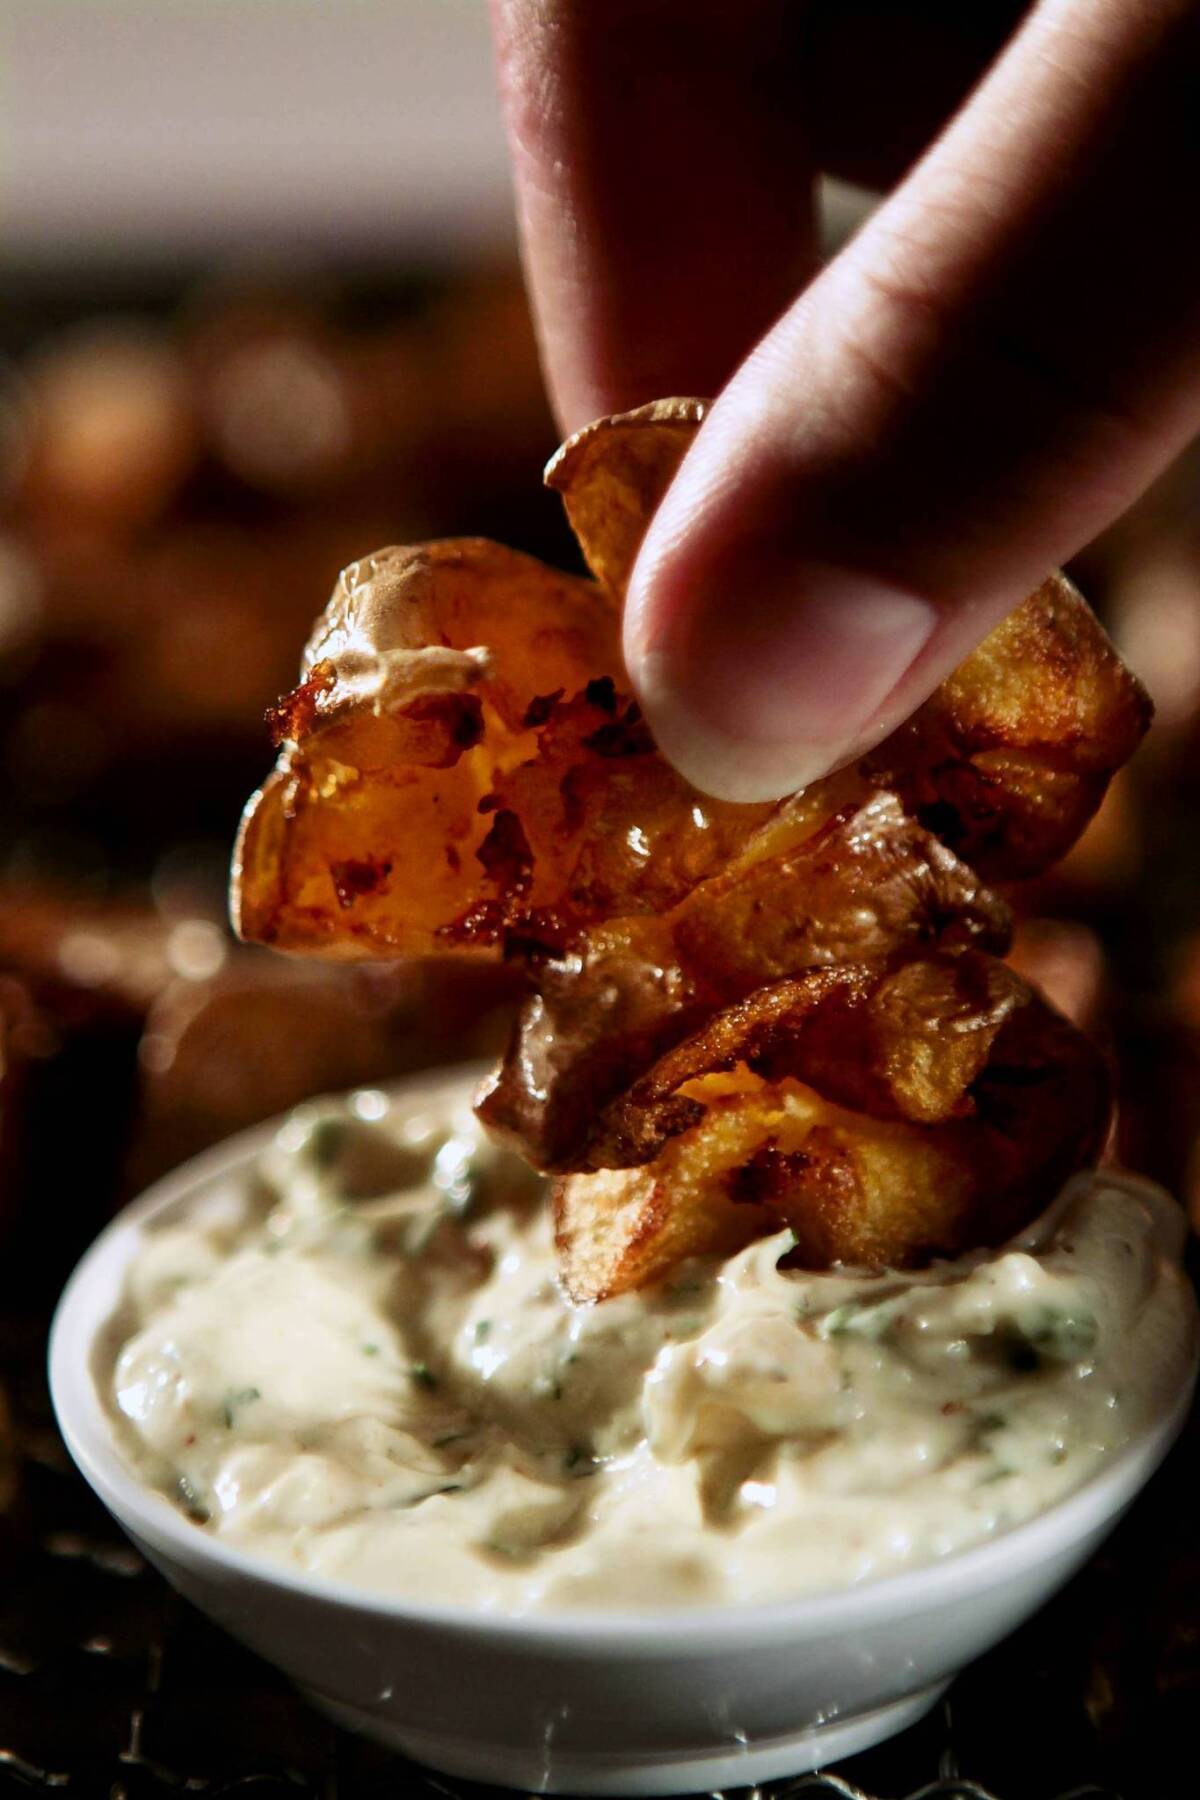 Smashed fried potatoes with creamy ranch dipping sauce.